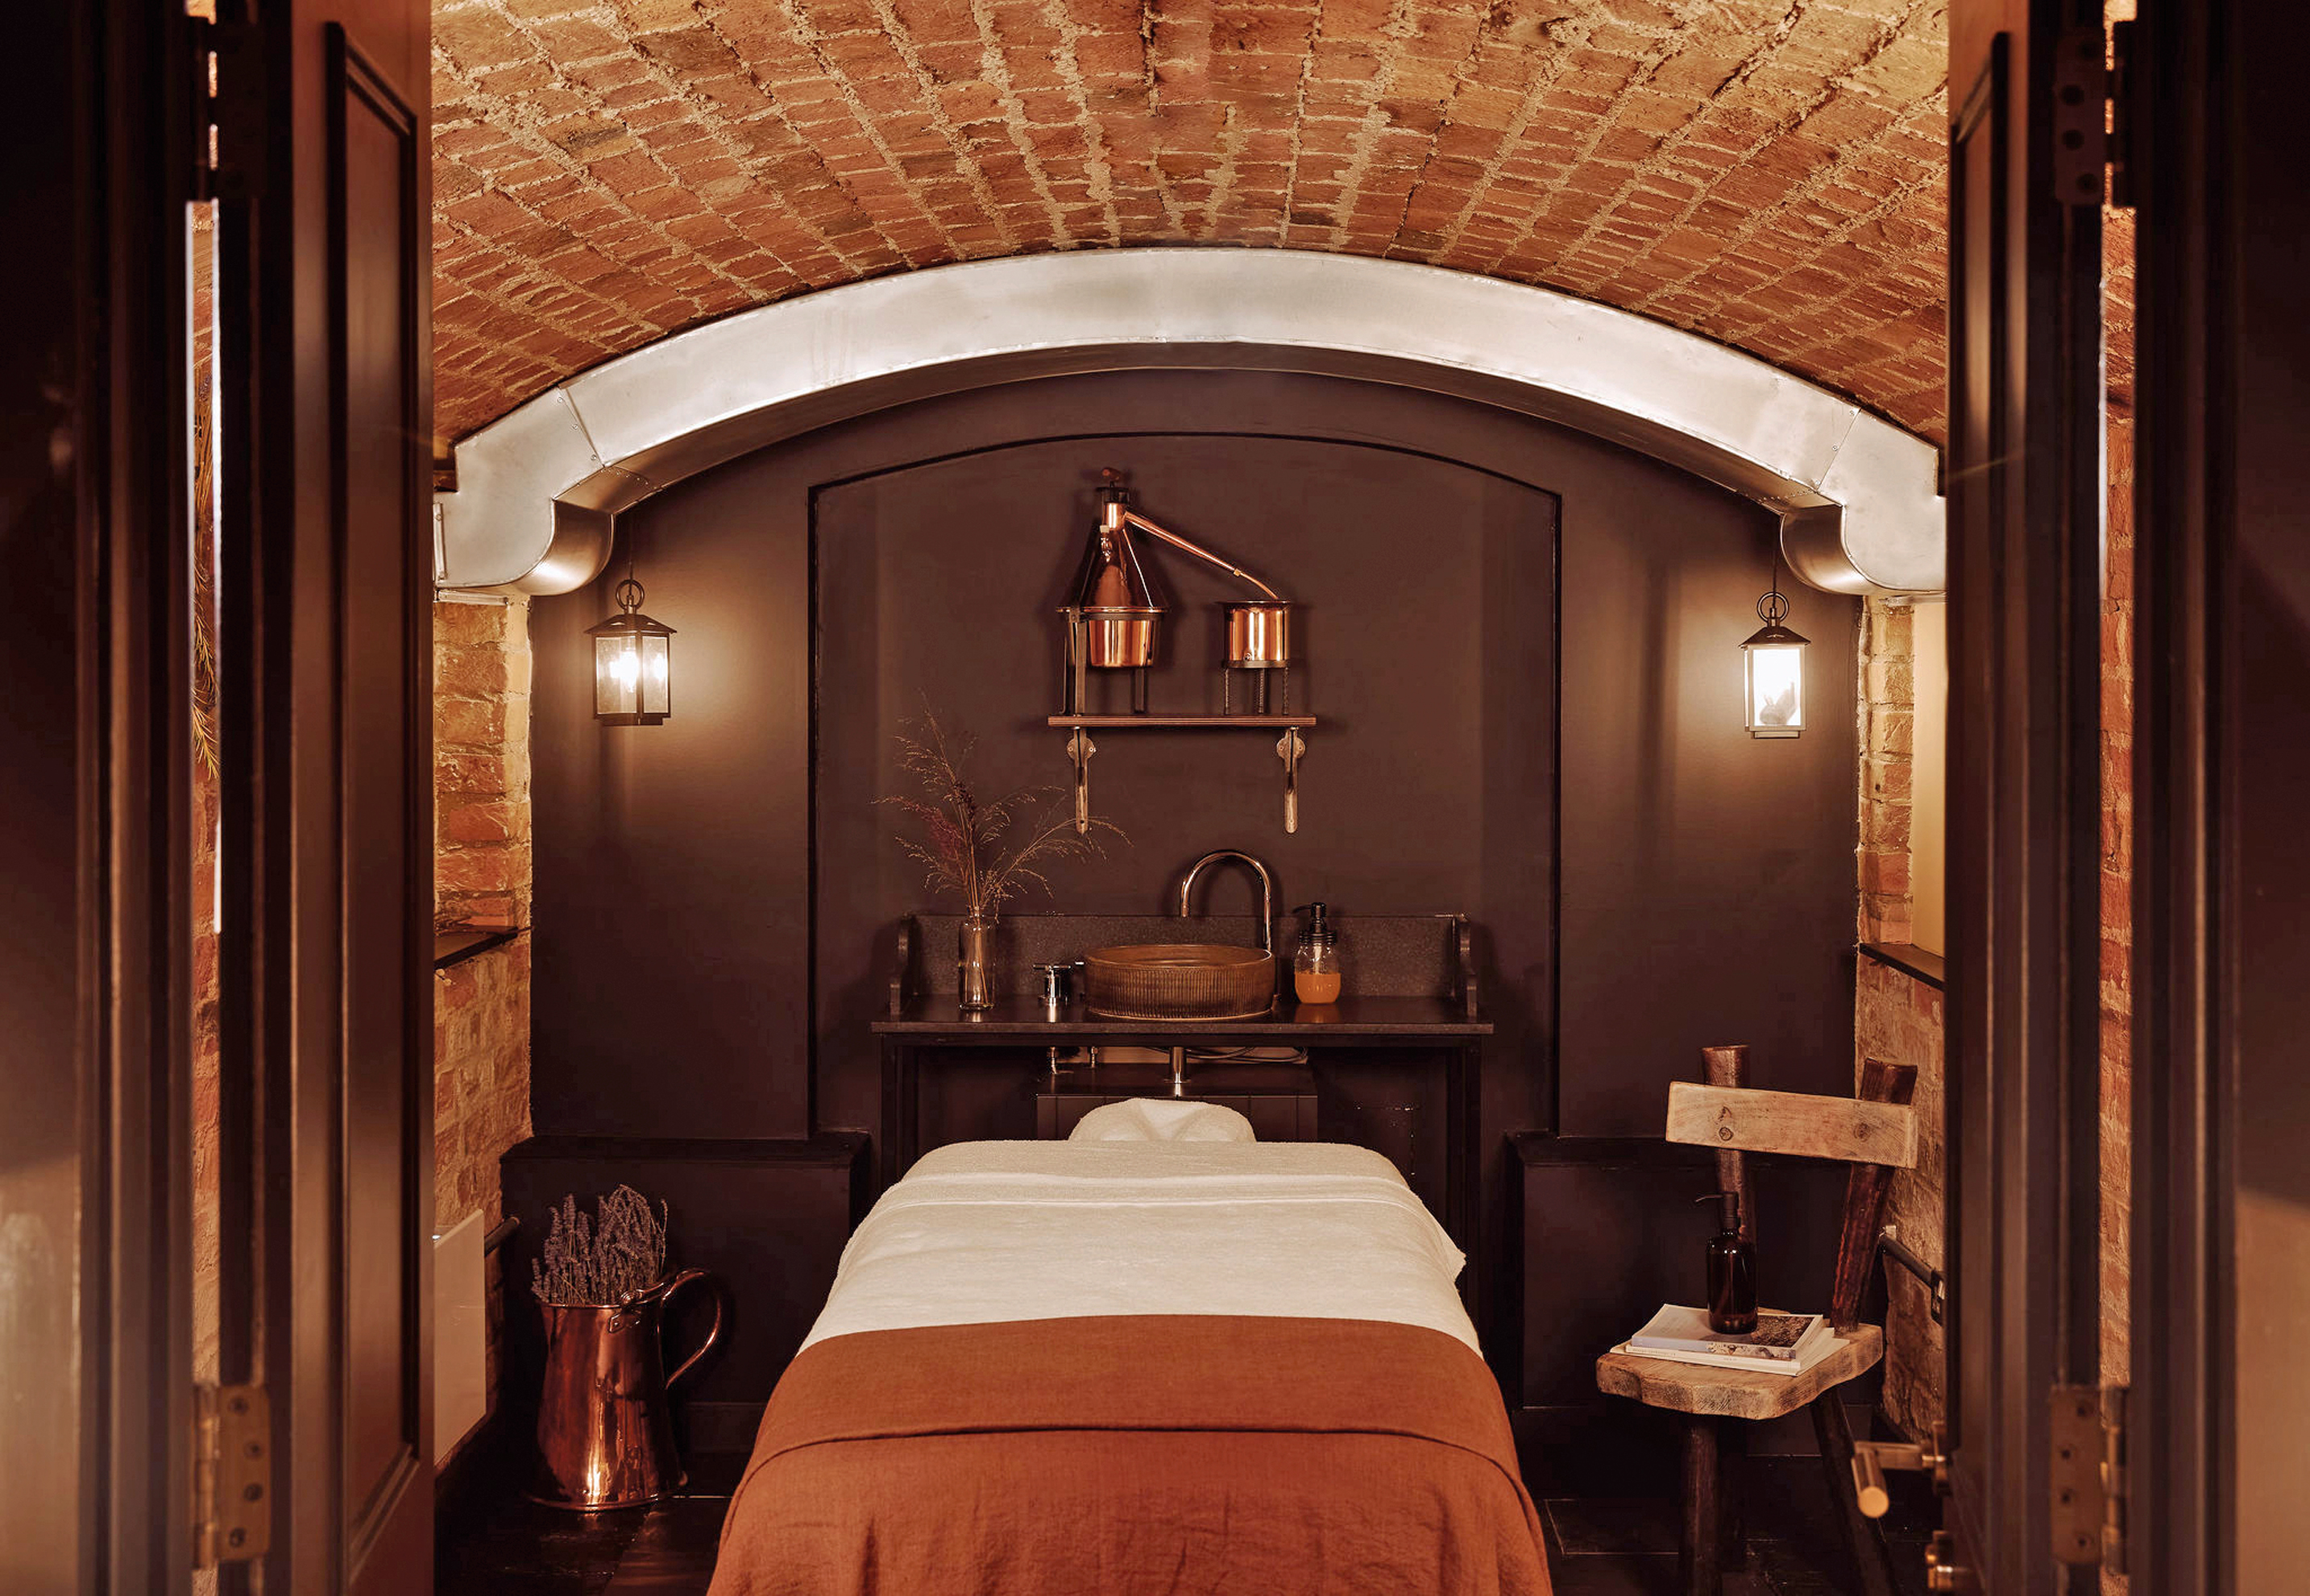 A spa treatment room at No.1 by GuestHouse, York (GuestHouse Hotels/PA)